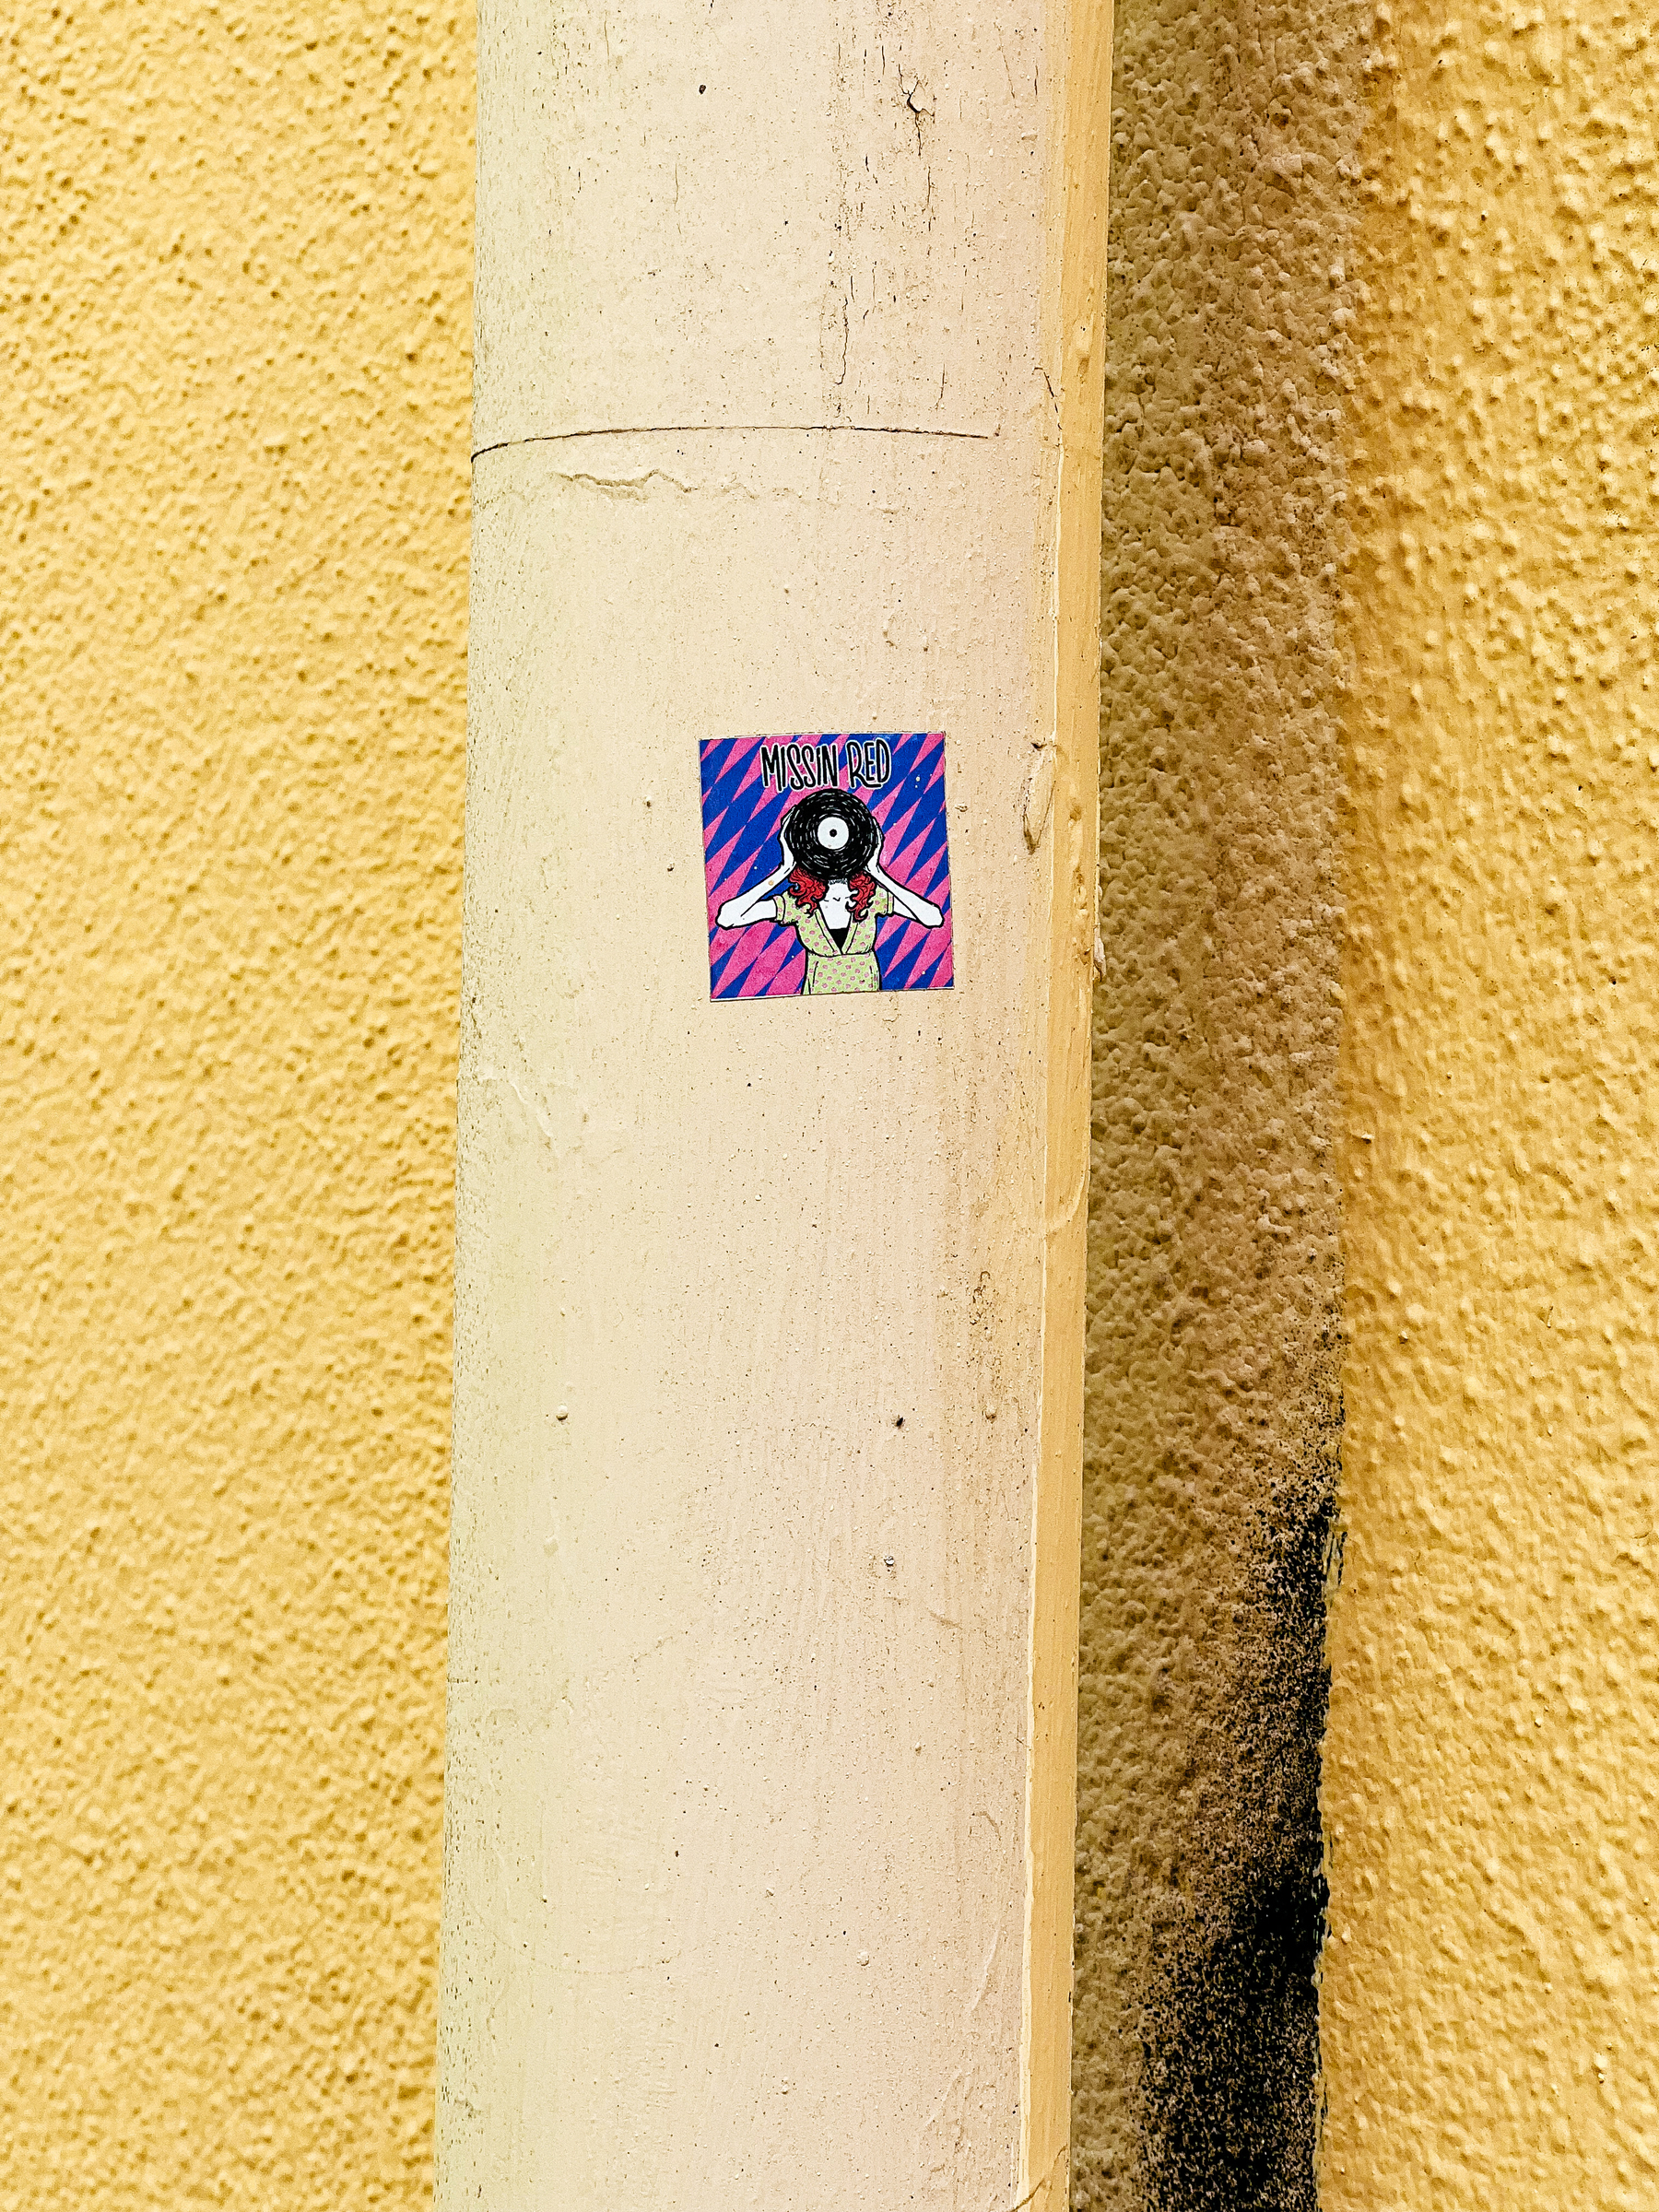 Sticker with a drawing of a red haired woman holding a vinyl LP covering her face, and the words “missin red”. 